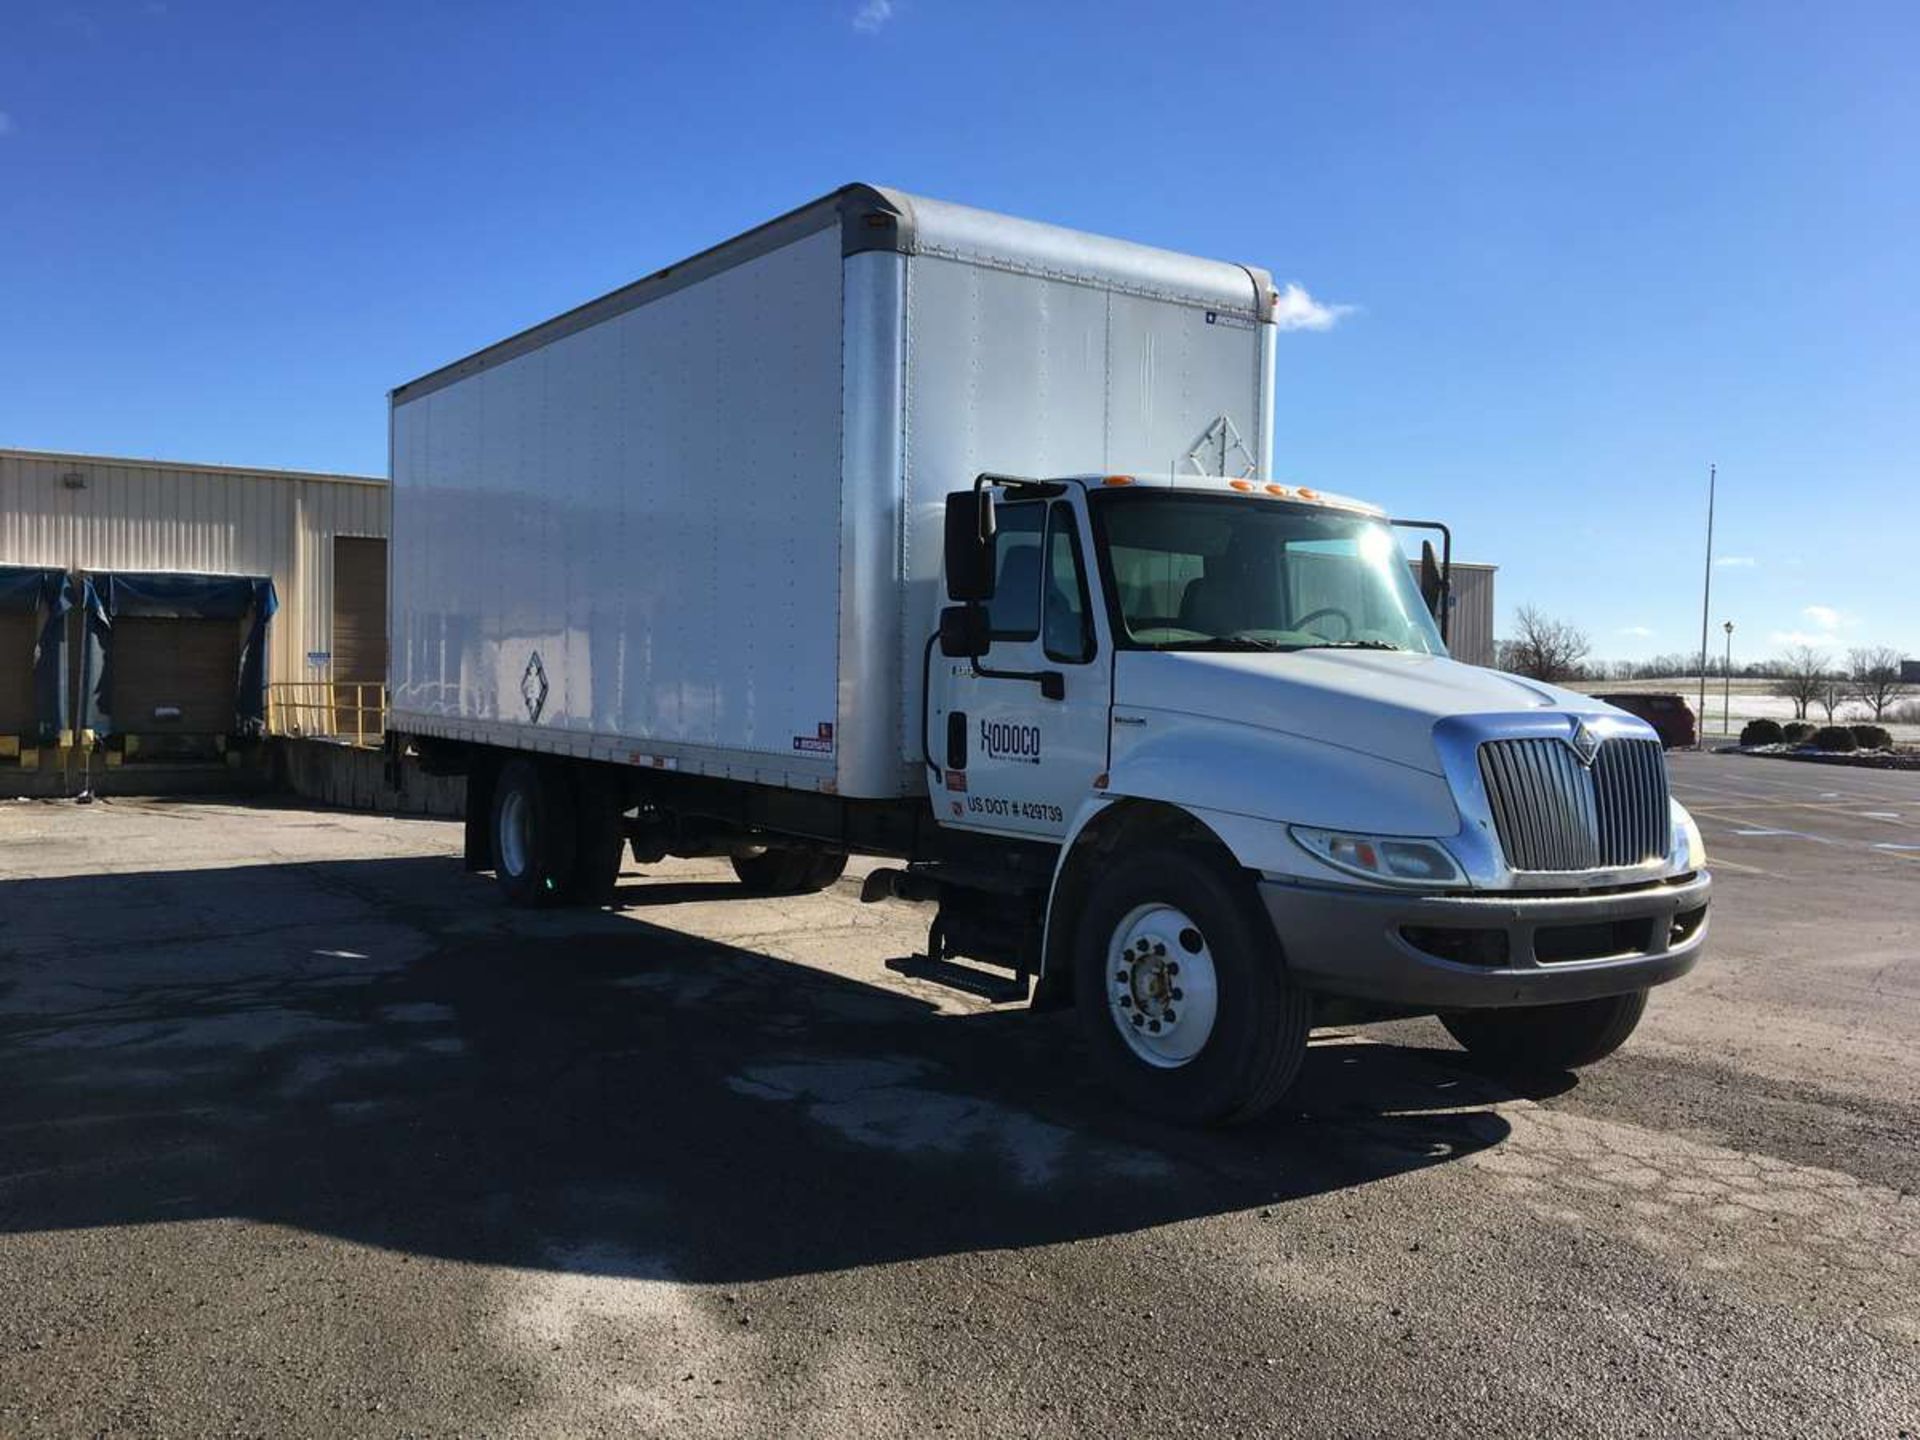 2009 International Max Force DT4300 24 Foot Commercial Box Truck - Image 4 of 12